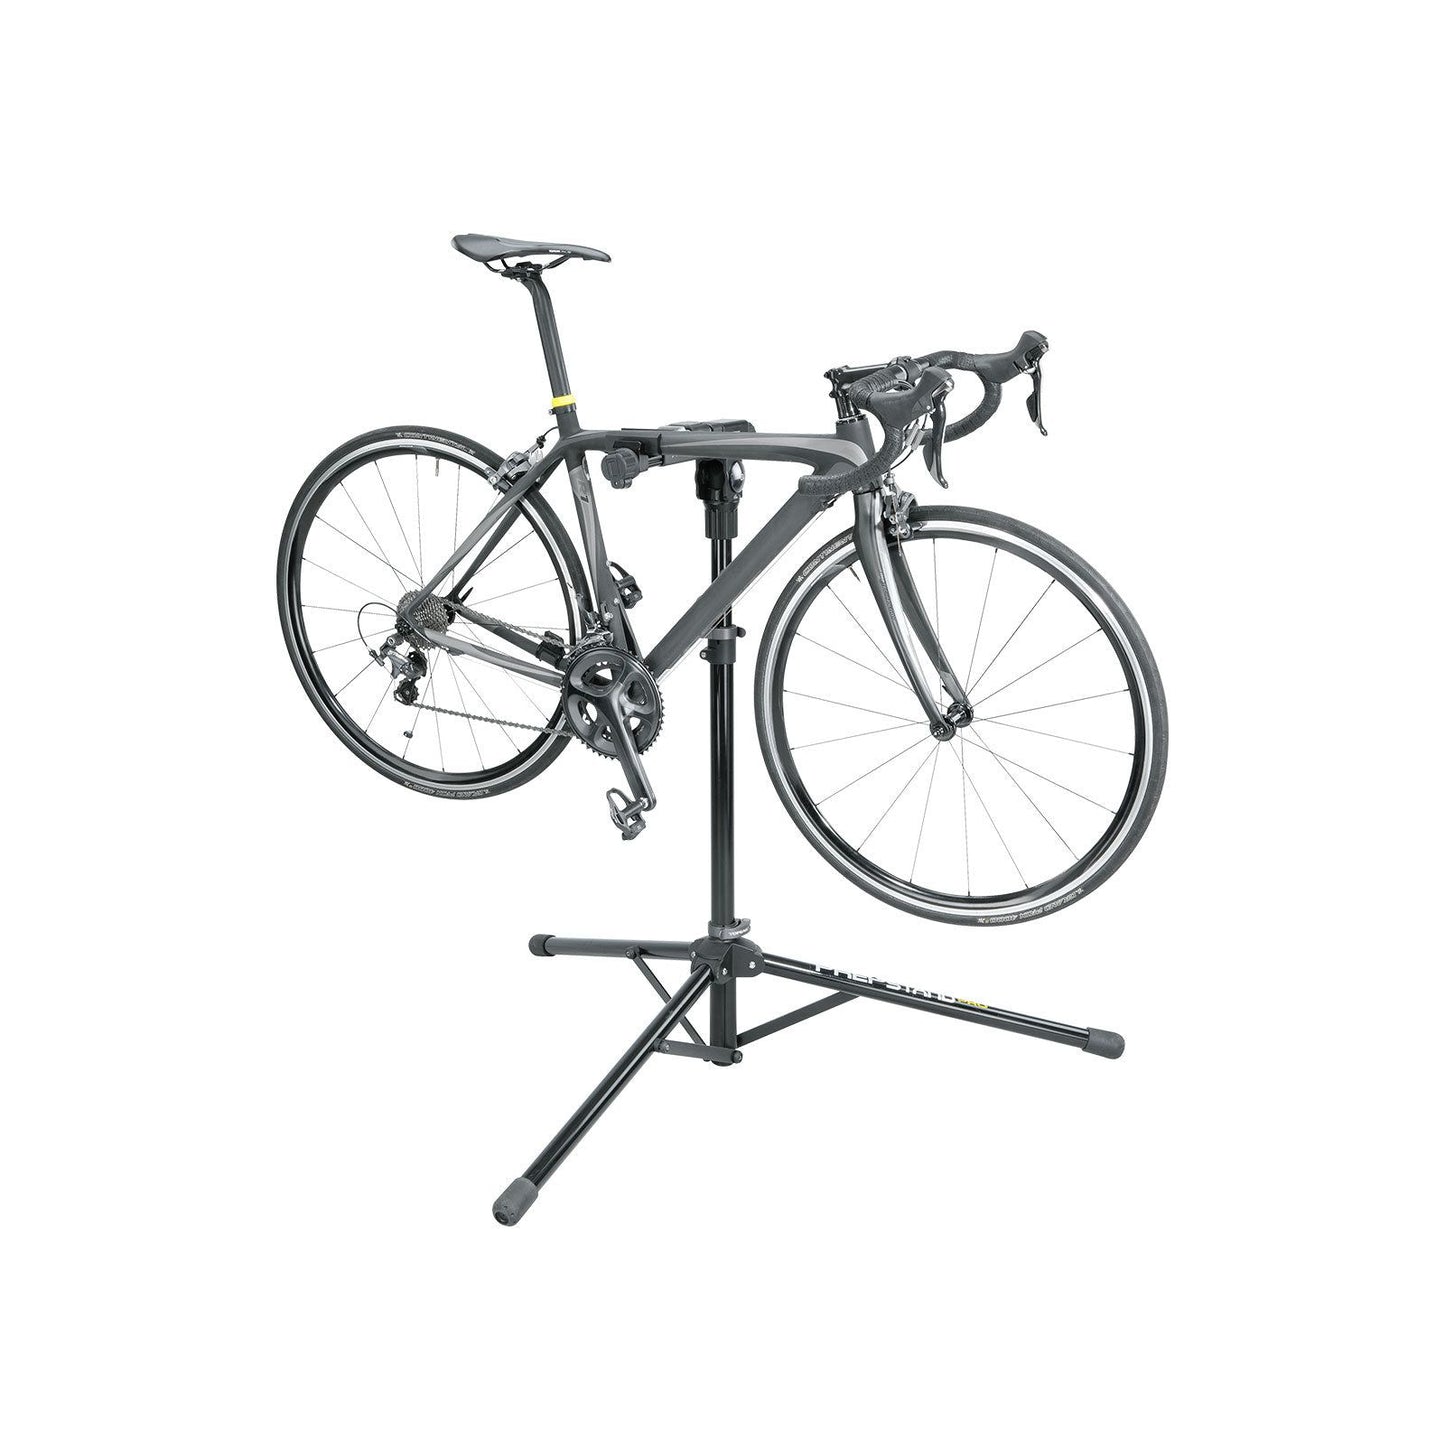 Topeak PrepStand Pro with Digital Weight Scale Workstand